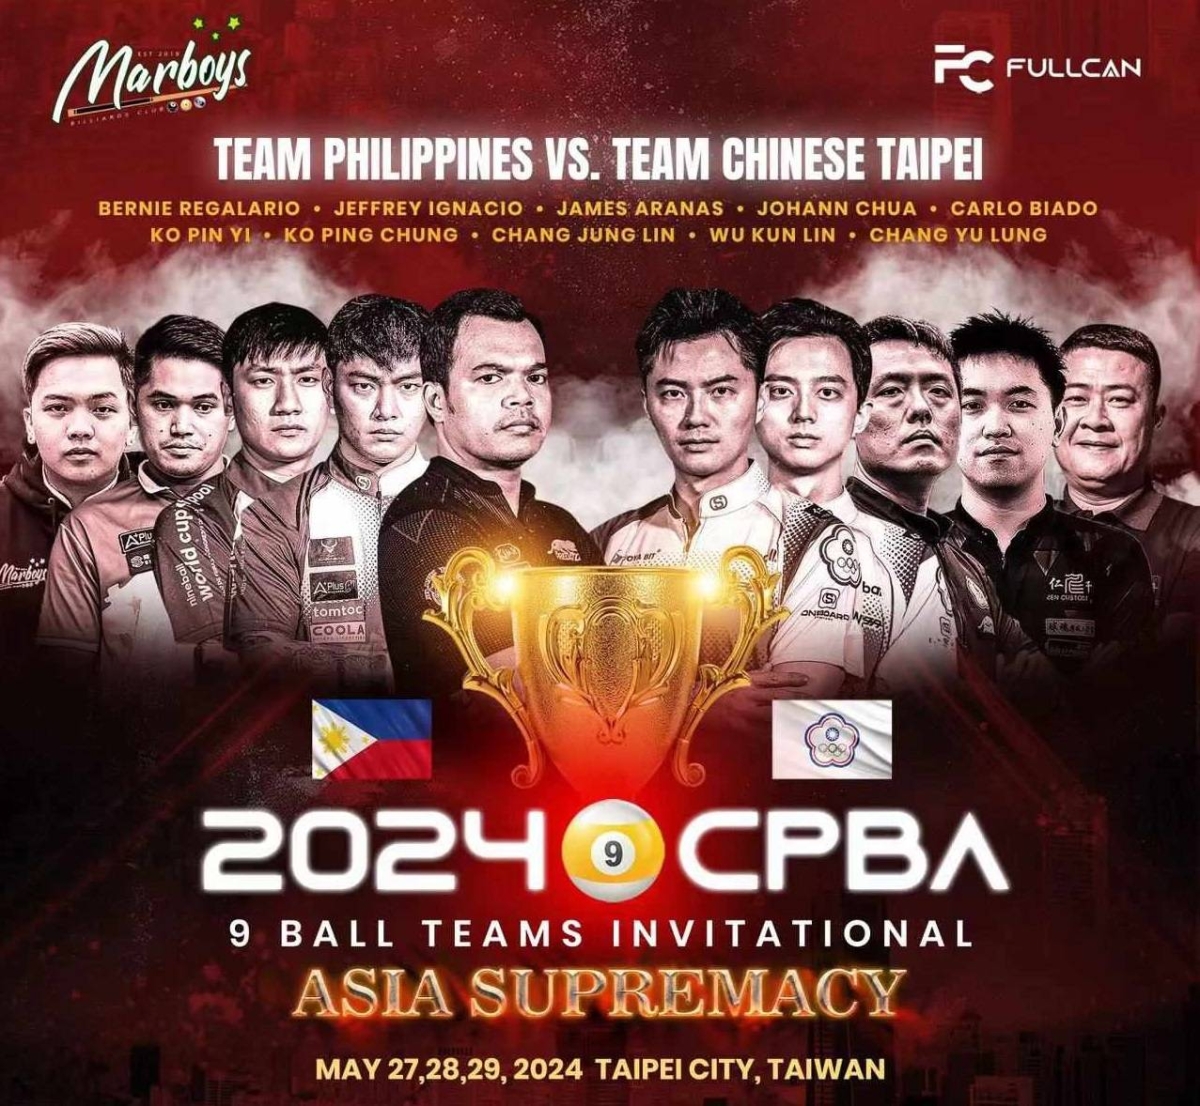 The Philippines and Chinese Taipei will engage in a five-man duel for Asian Supremacy in the 2024 CPBA 9-Ball Teams Invitational tournament on May 27-29, 2024 in New Taipei City, Taiwan. CONTRIBUTED PHOTO